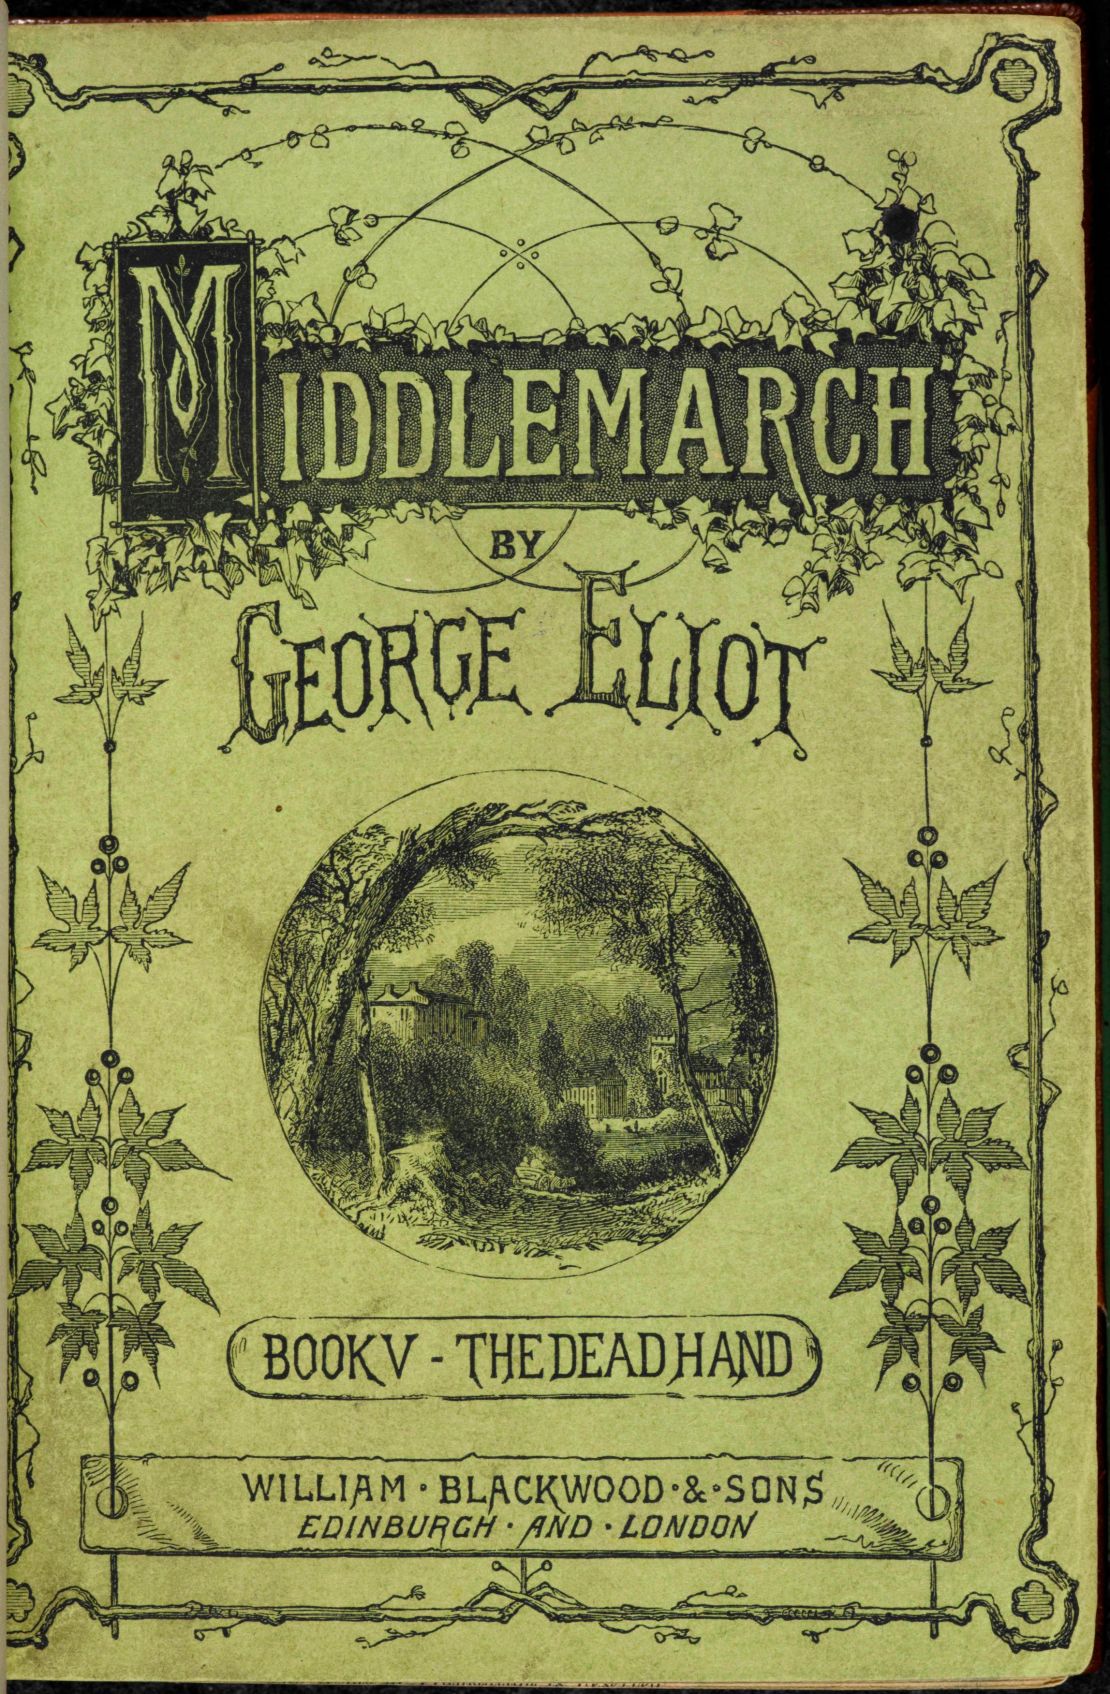 The illustrated title page of "Middlemarch," by George Eliot, in an 1871 issue of the book. 